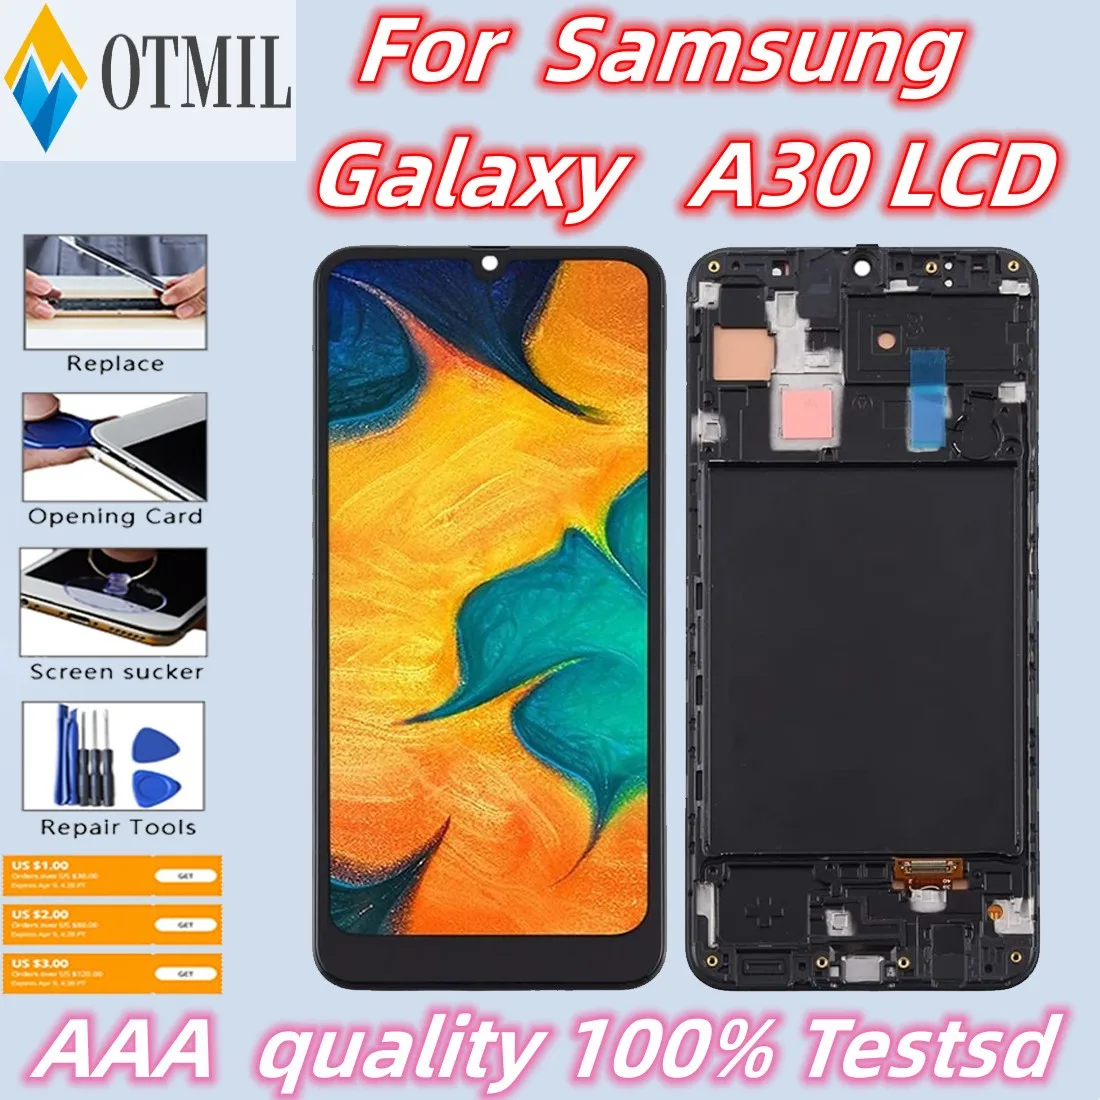 

6.4"LCD For Samsung Galaxy A30 A305/DS A305F A305FD A305A LCD Display Touch Screen Digitizer Replacement For Samsung A30 Display